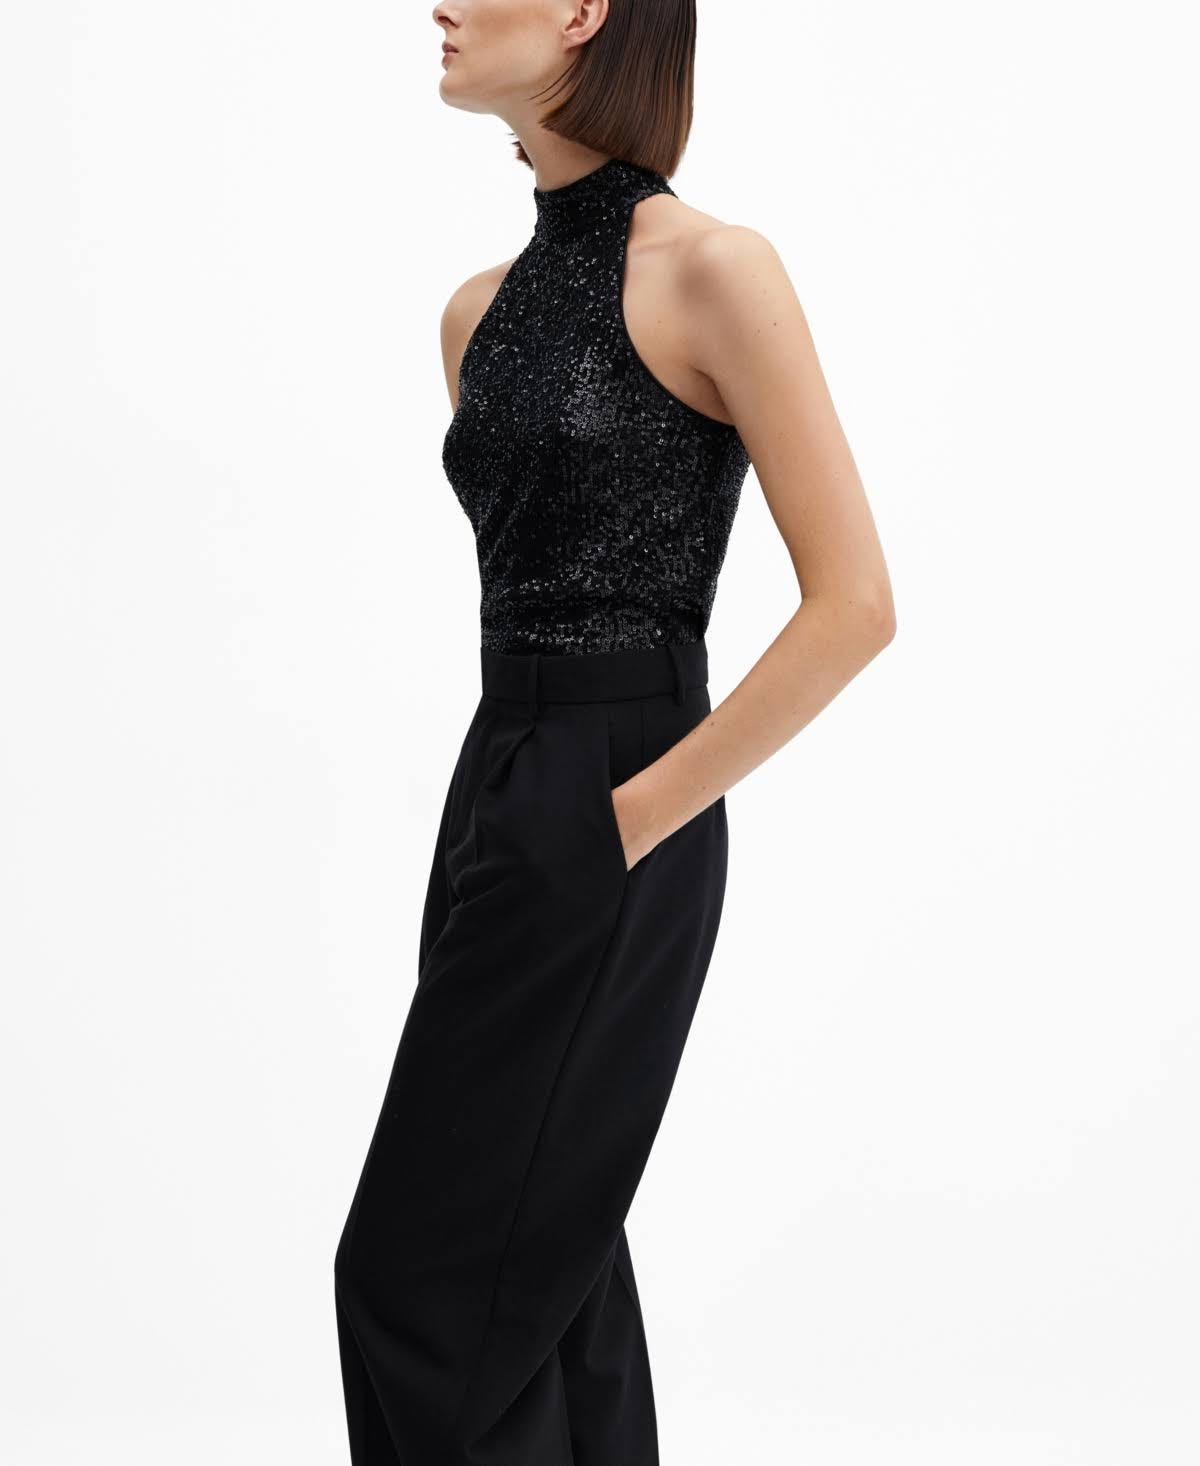 Black Sequin Halter Top for Stylish Events | Image